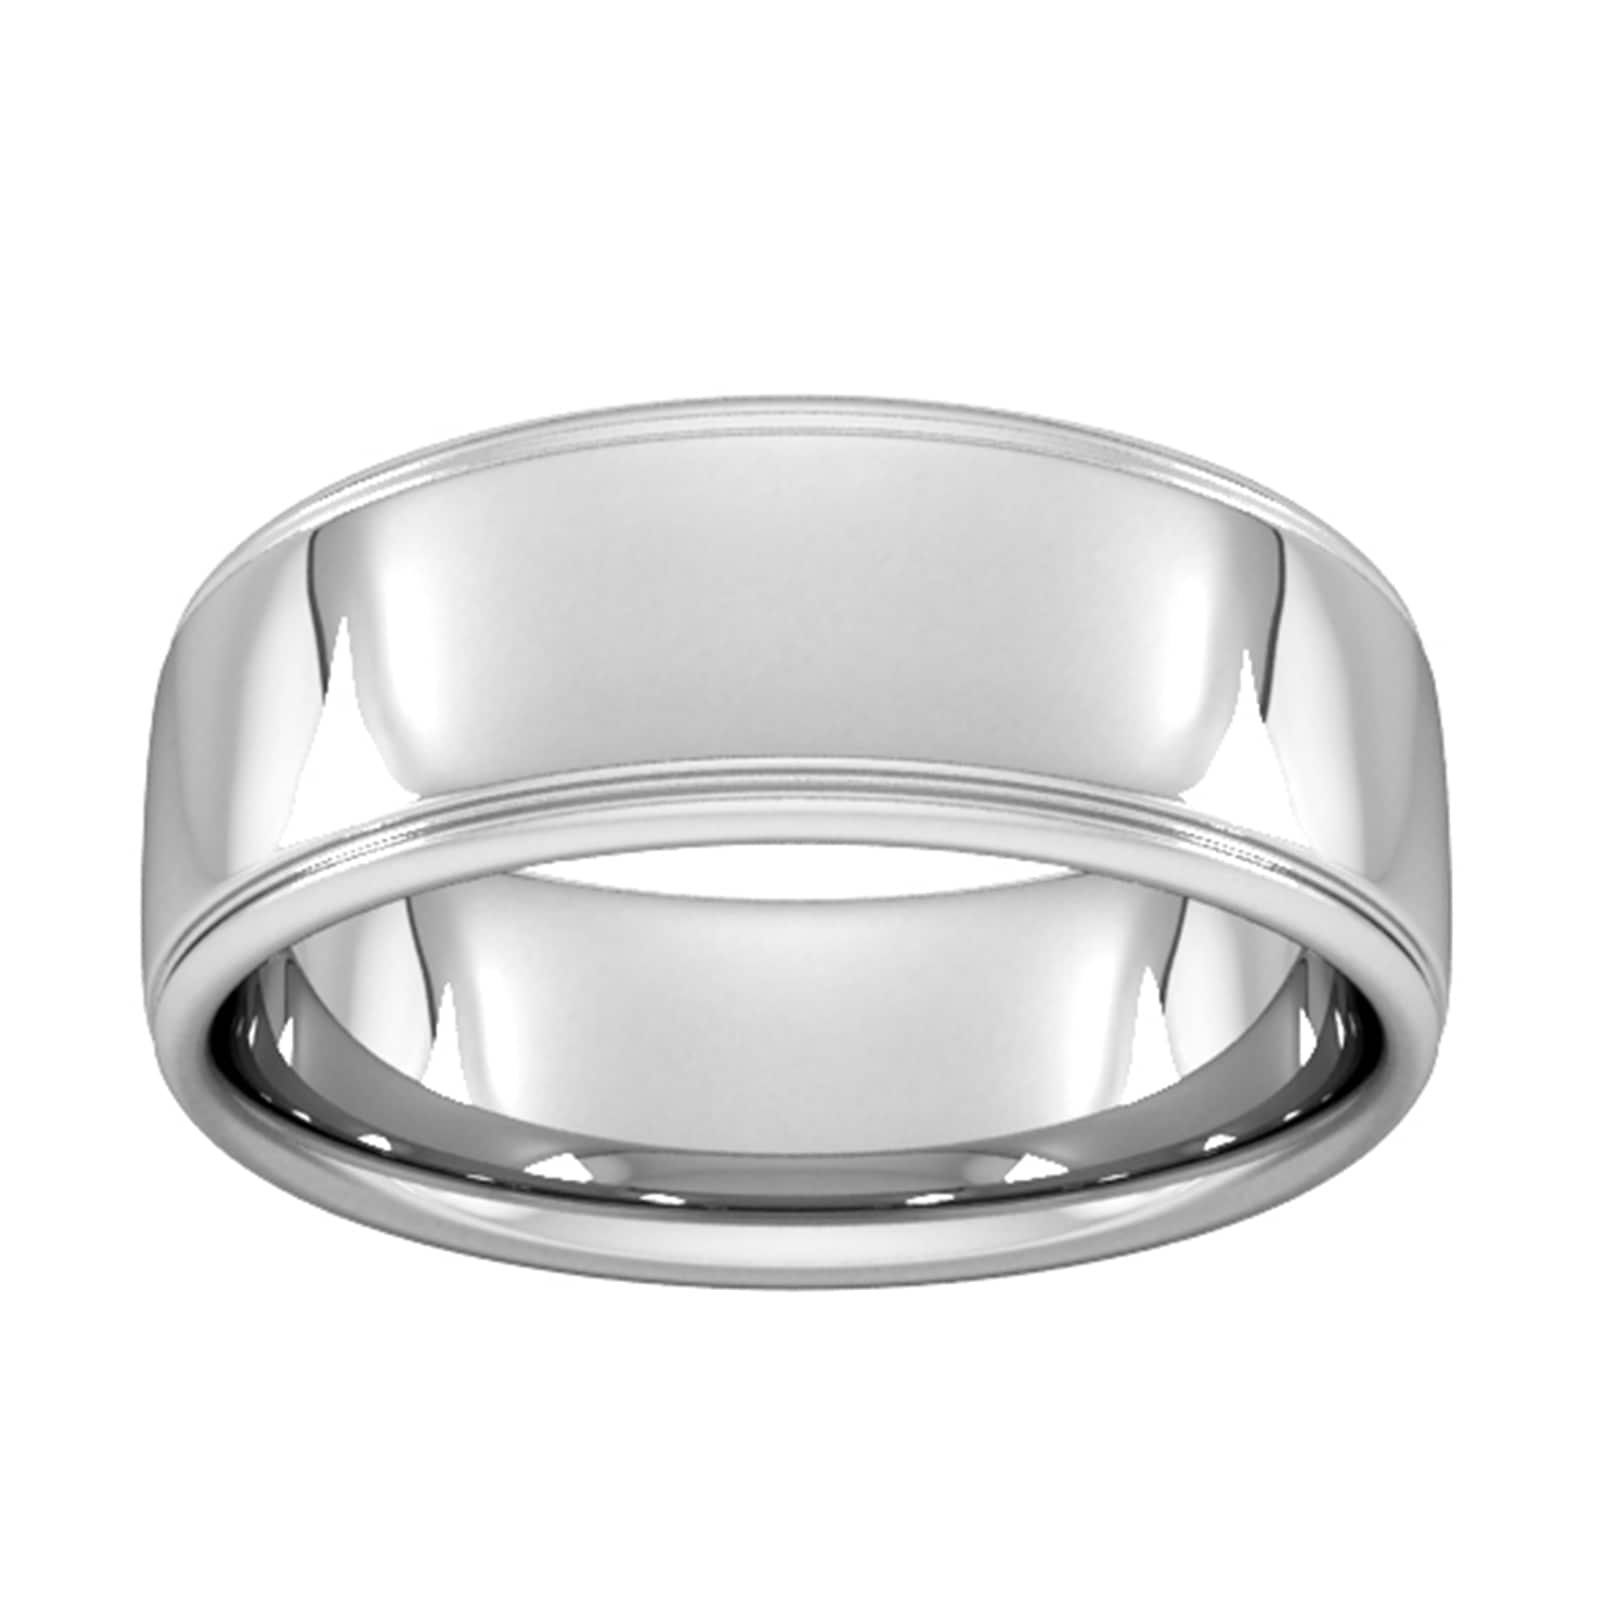 8mm Slight Court Heavy Polished Finish With Grooves Wedding Ring In 9 Carat White Gold - Ring Size M